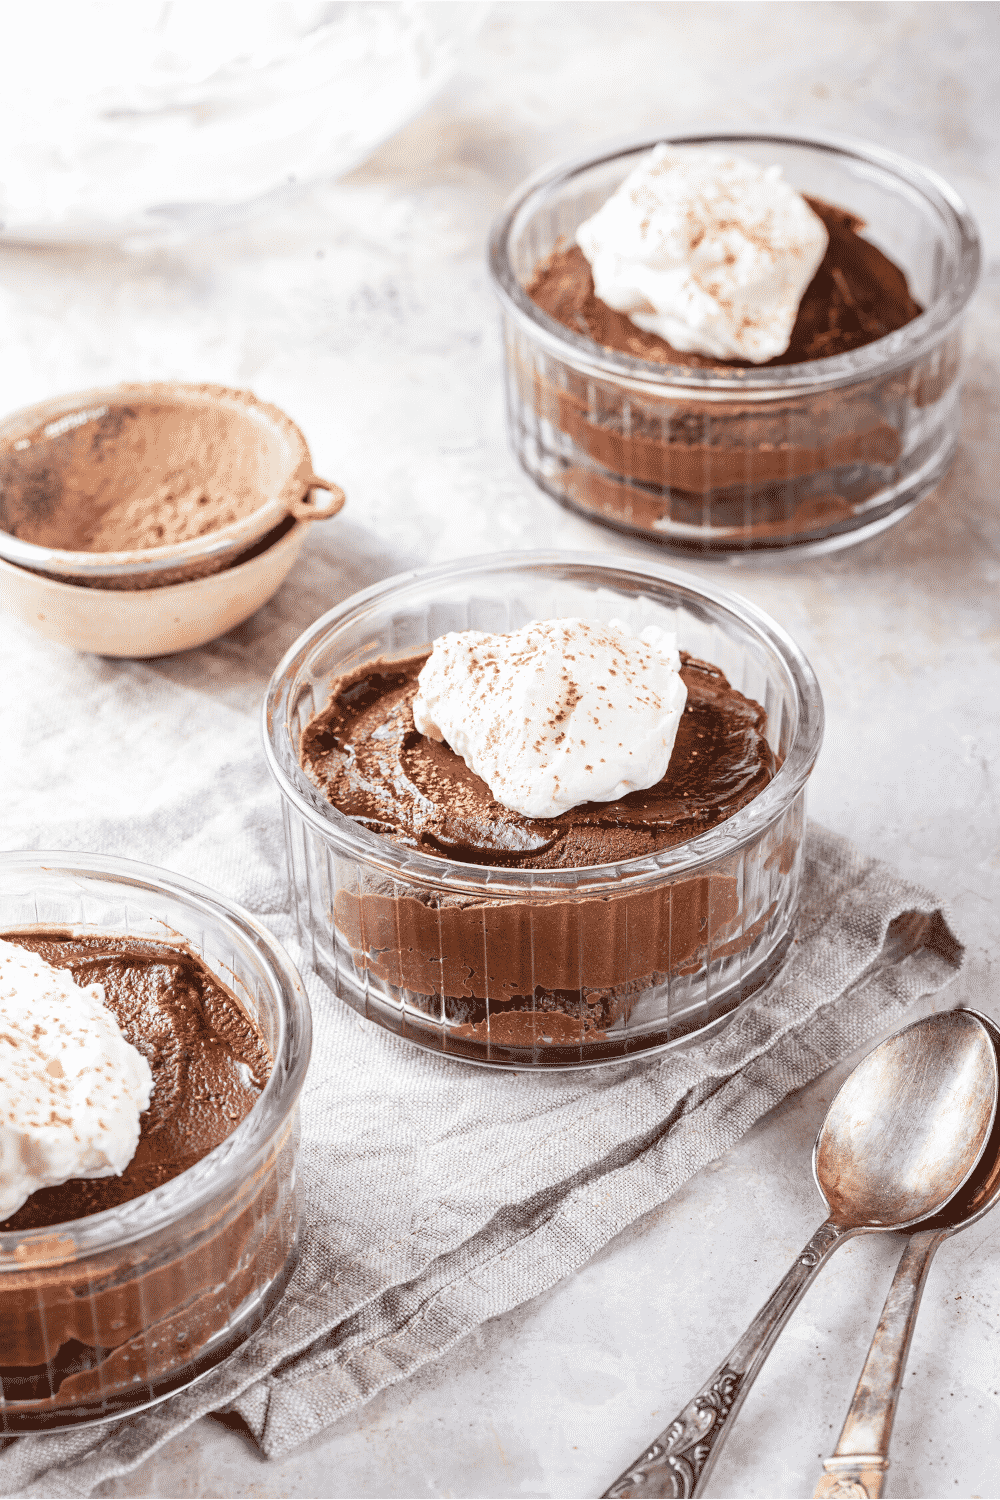 Three glass bowls of keto chocolate mousse lined up unevenly in a row. There is whipped cream on top of the keto mousse and the bowls are on a grey tablecloth. To the left of the bowl in the middle is a small bowl of cocoa powder.